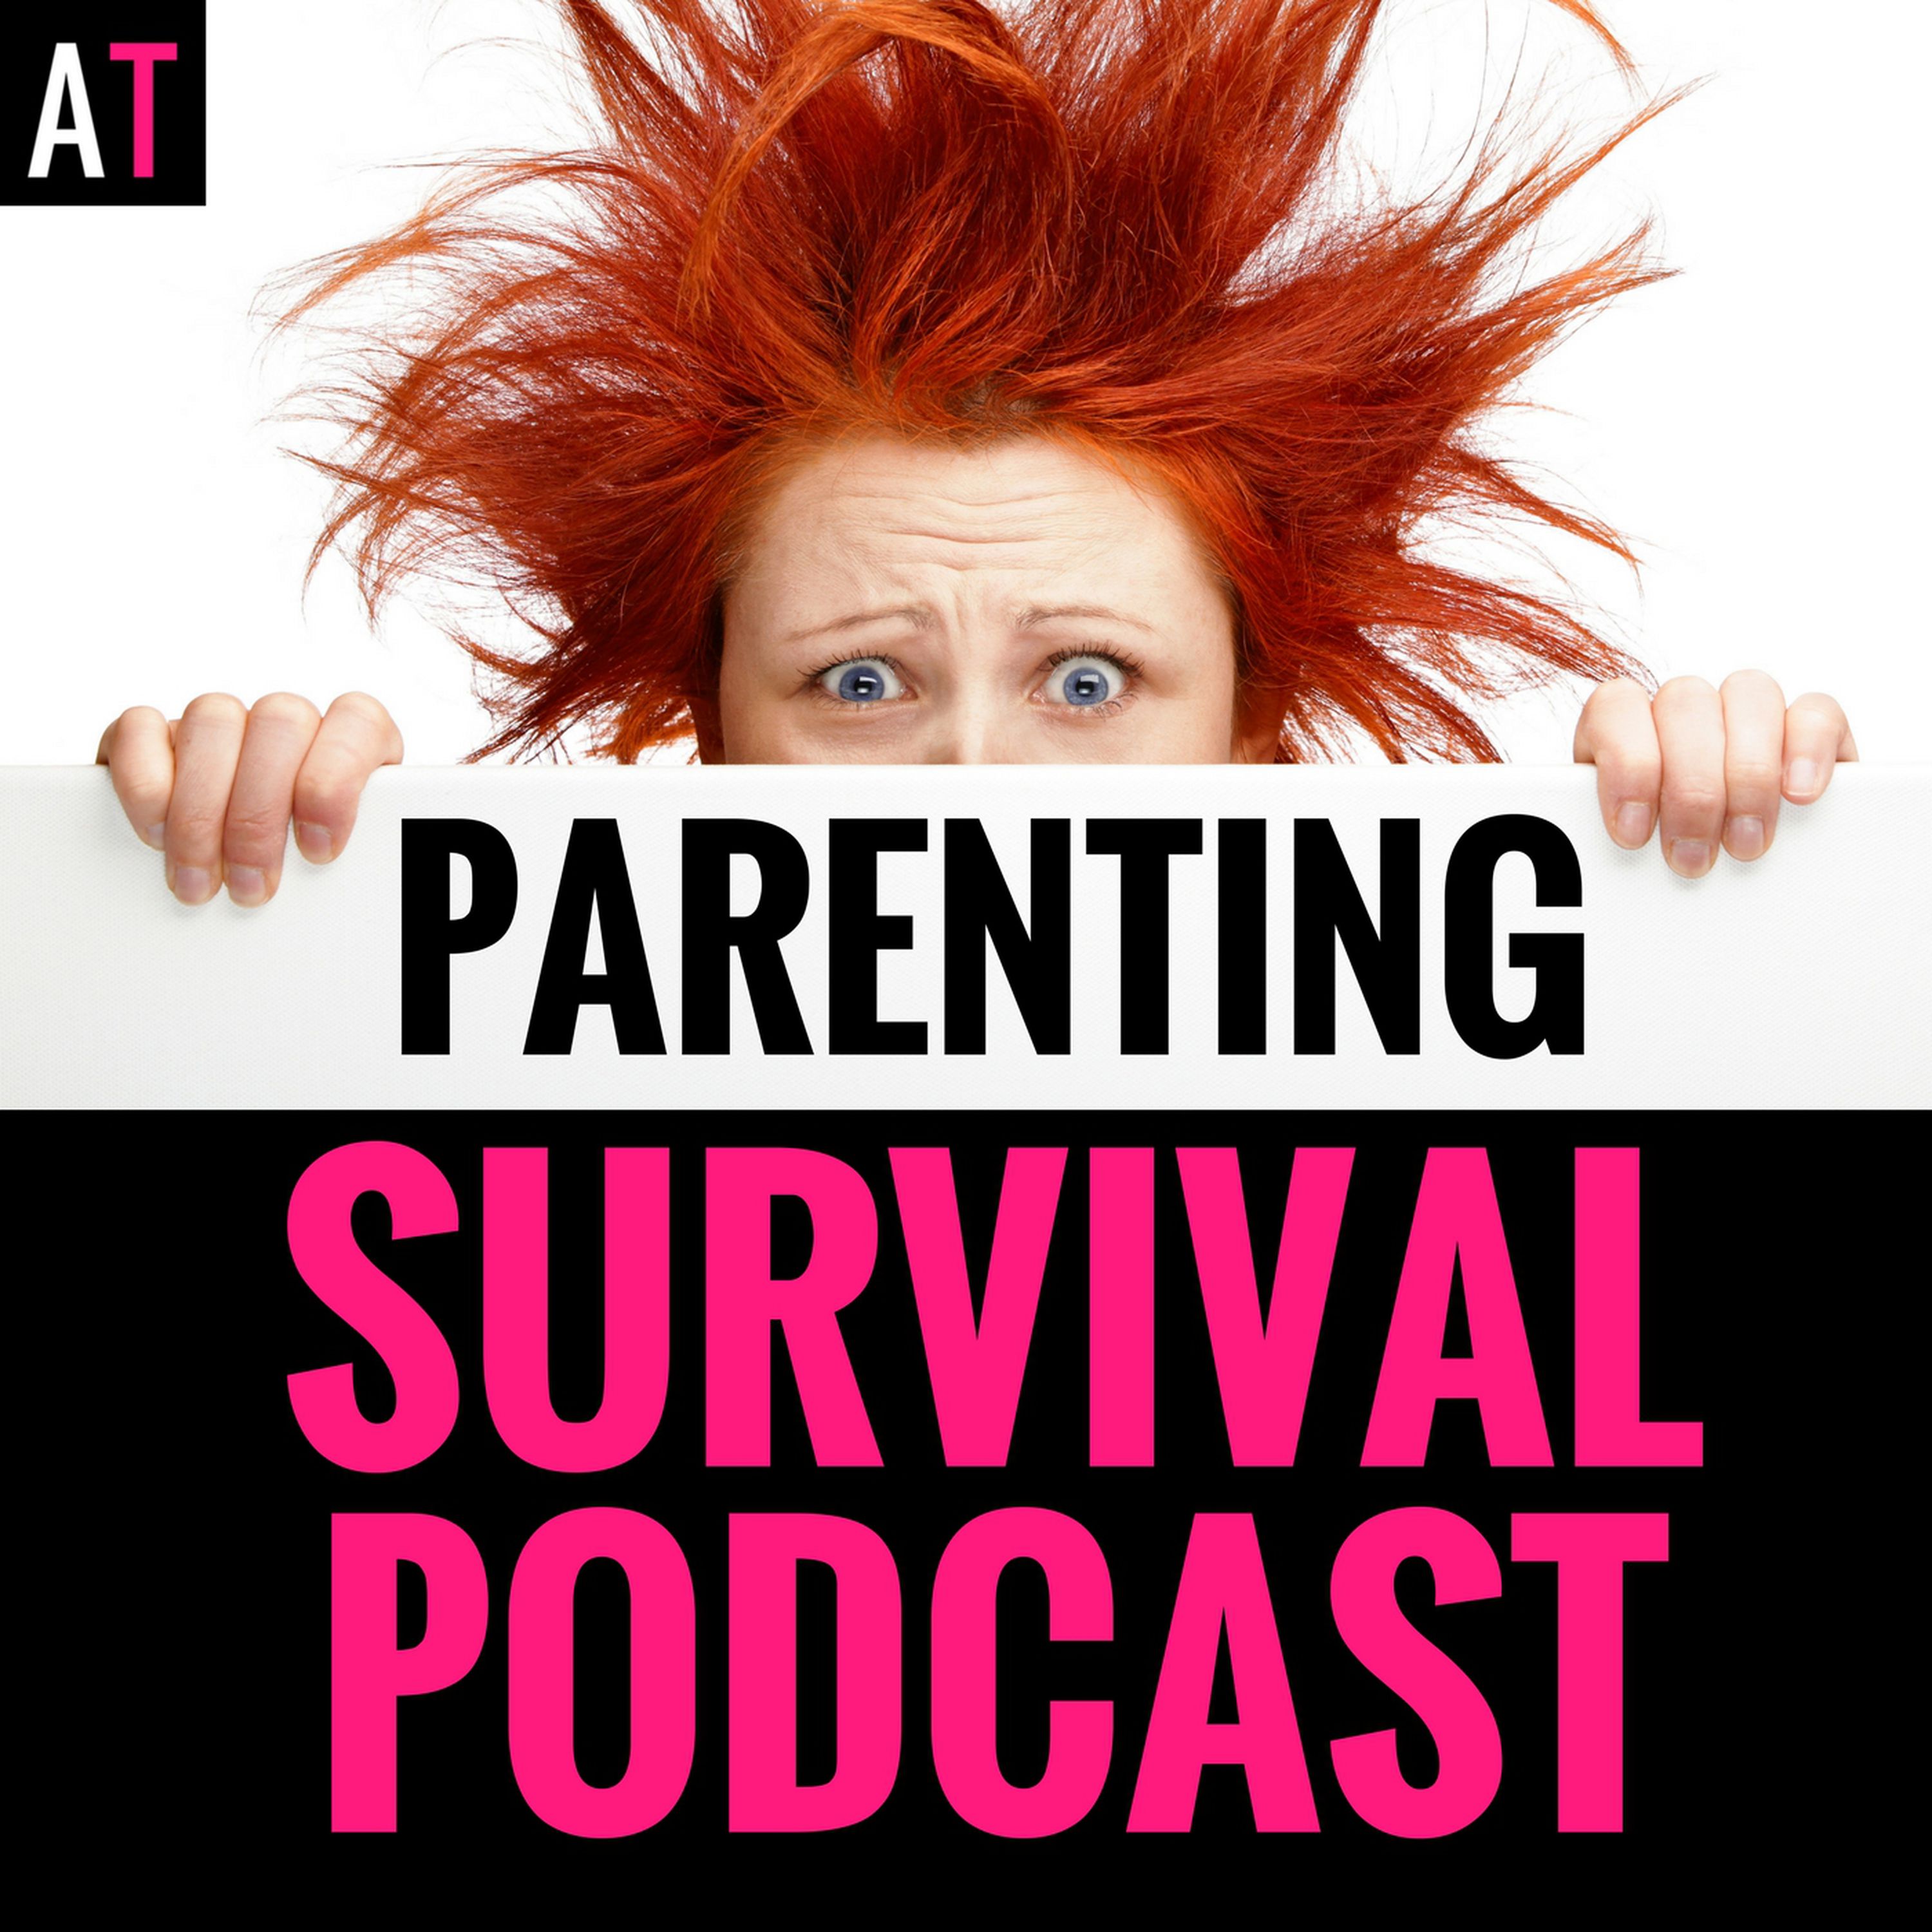 PSP 011: 4 Things Parents Get Wrong About Childhood OCD